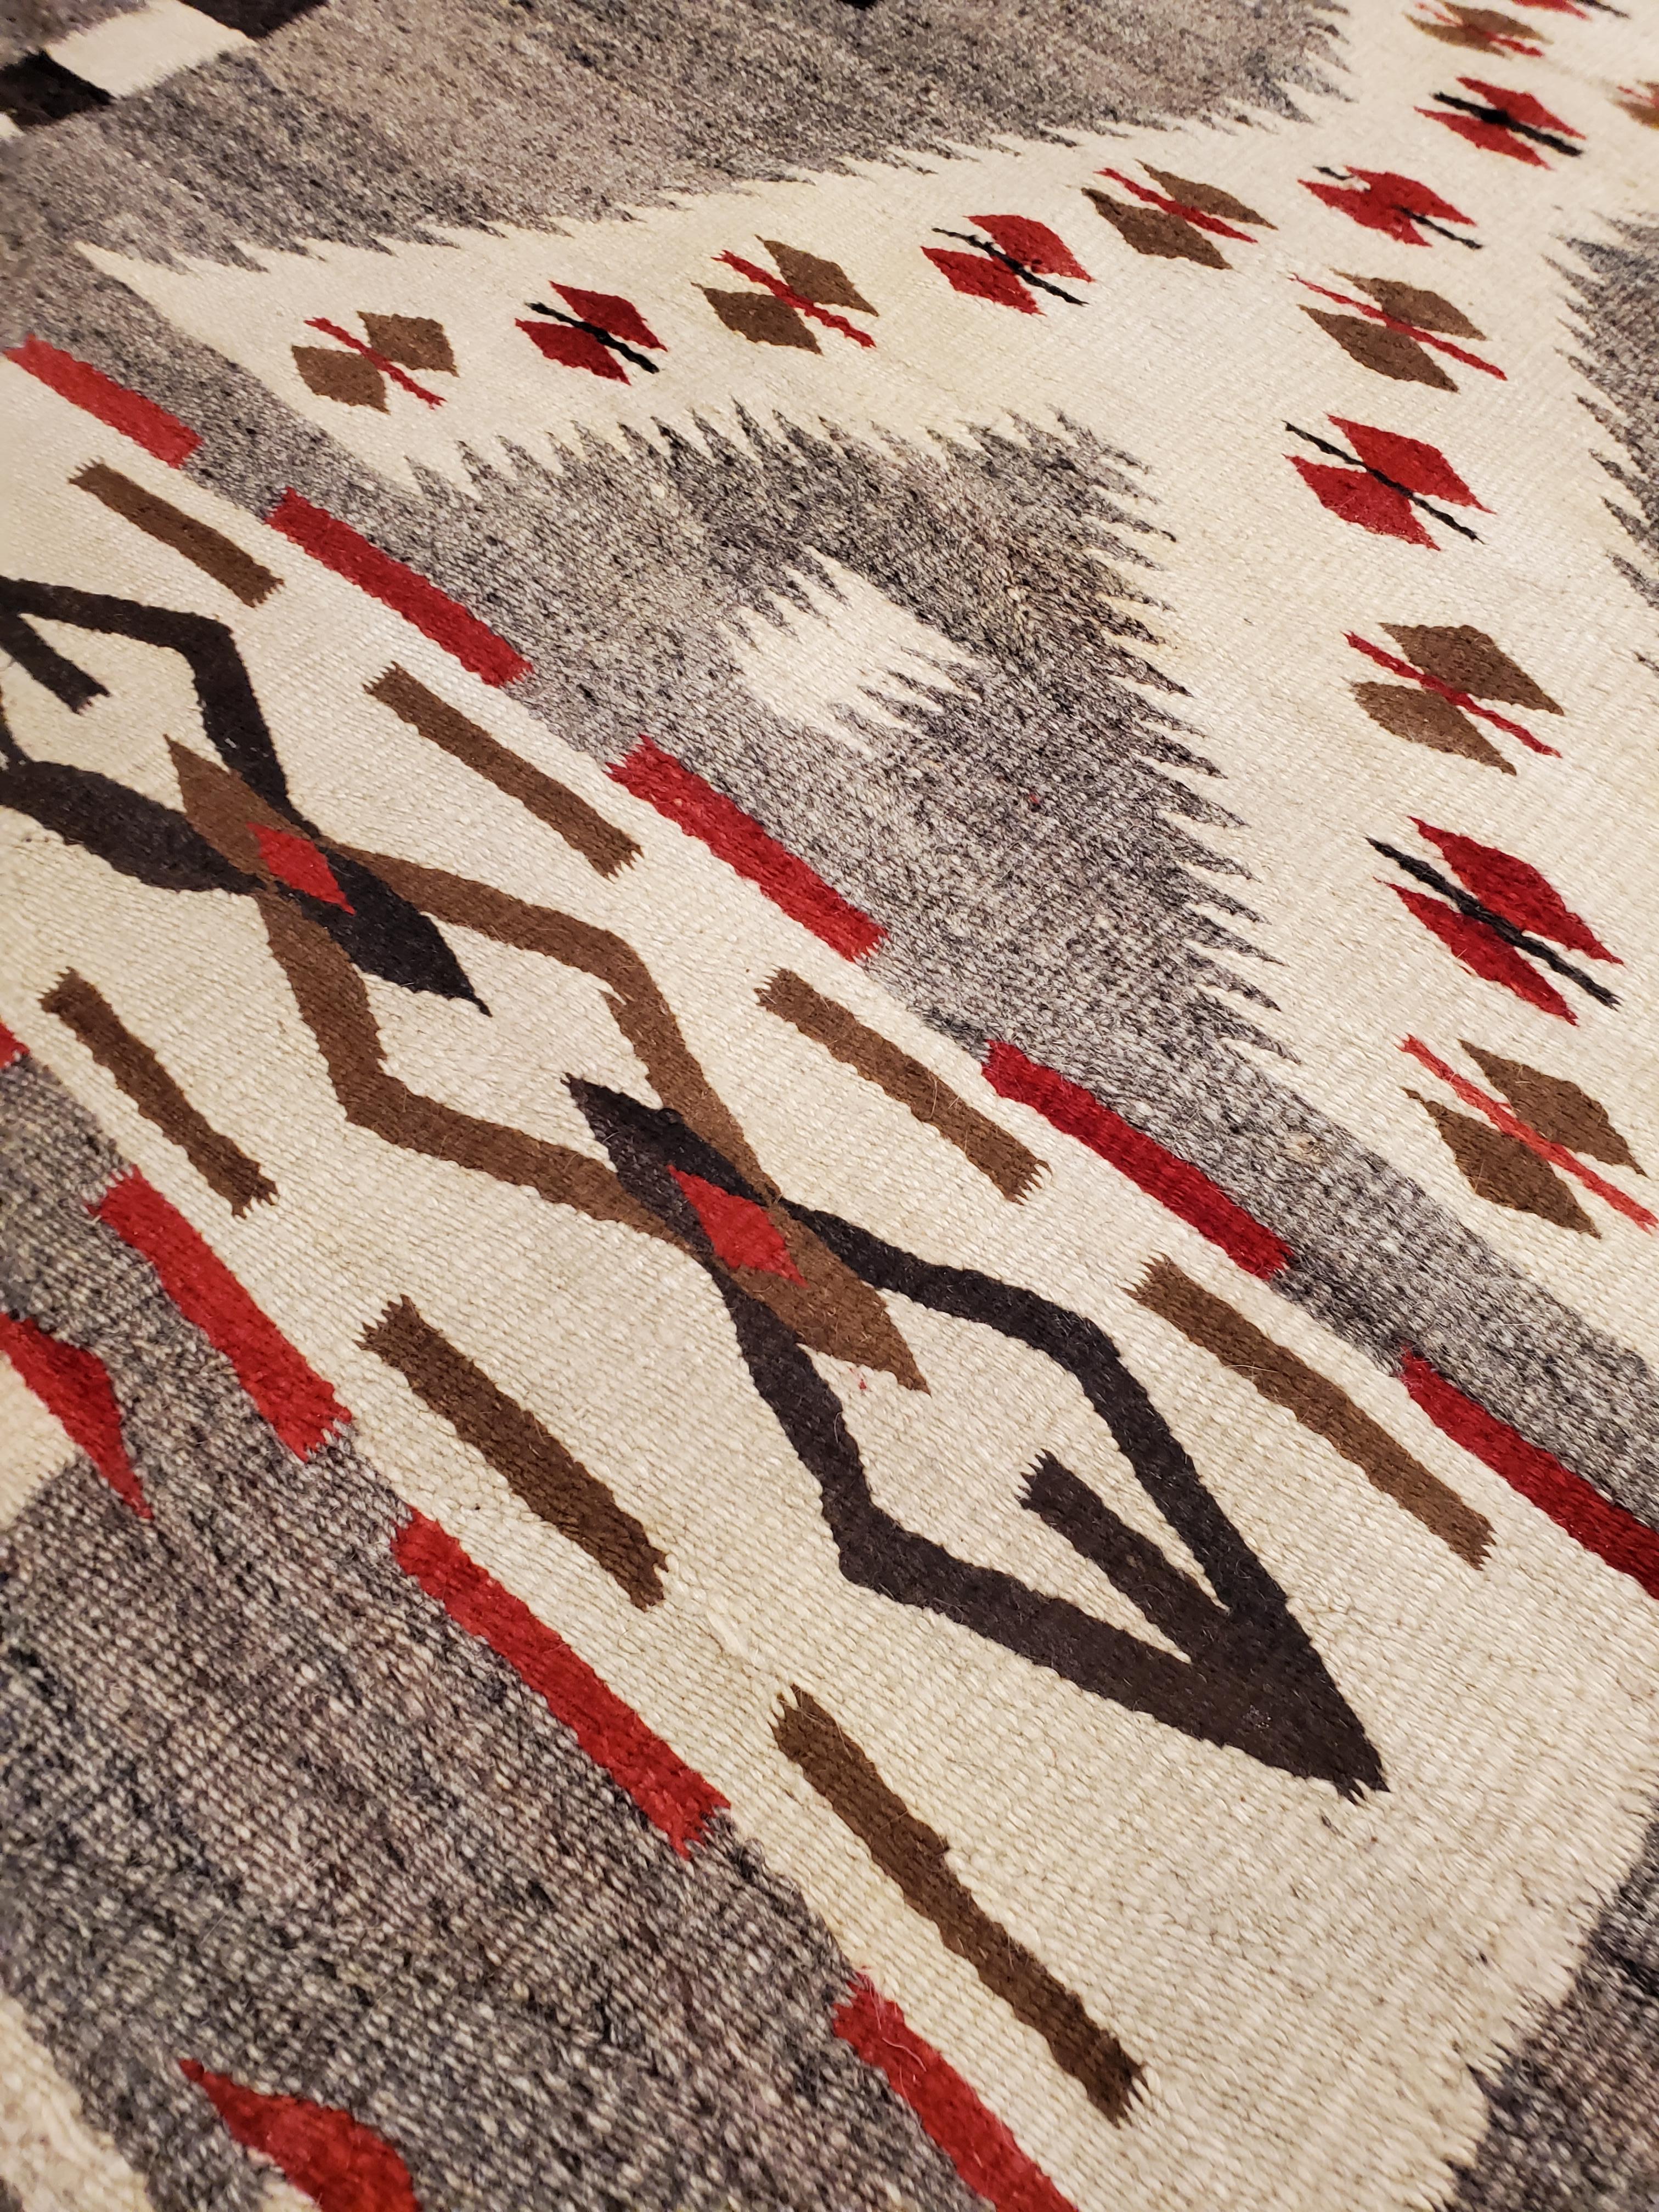 Antique Navajo Carpet, Folk Rug, Handmade Wool Rug, Beige, Gray, Brown In Excellent Condition For Sale In Port Washington, NY